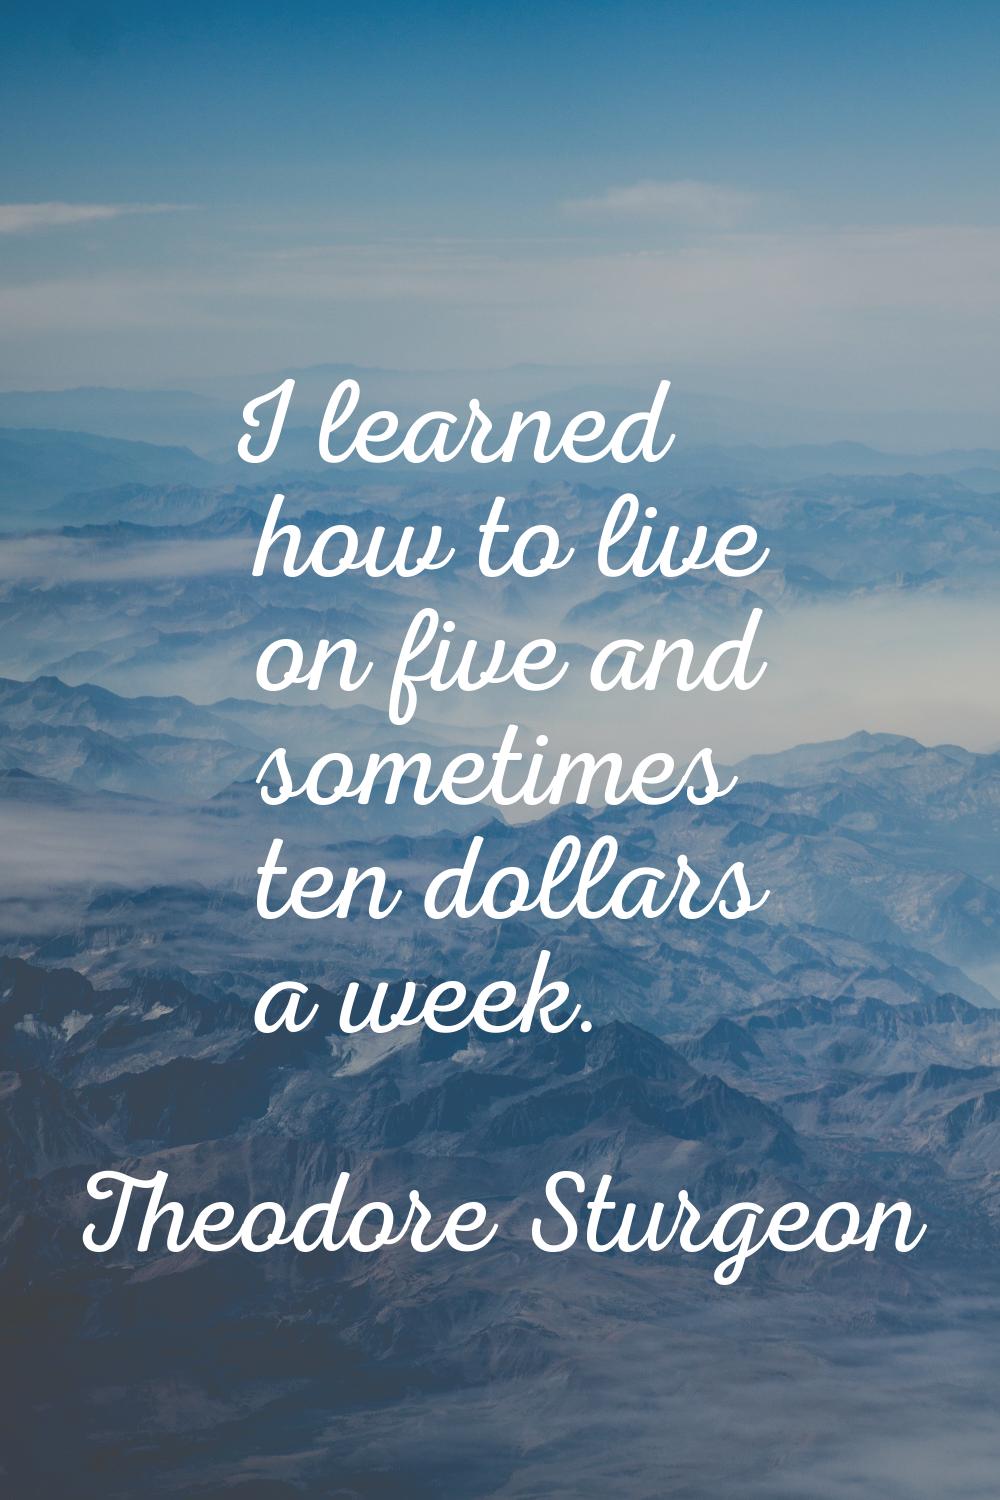 I learned how to live on five and sometimes ten dollars a week.